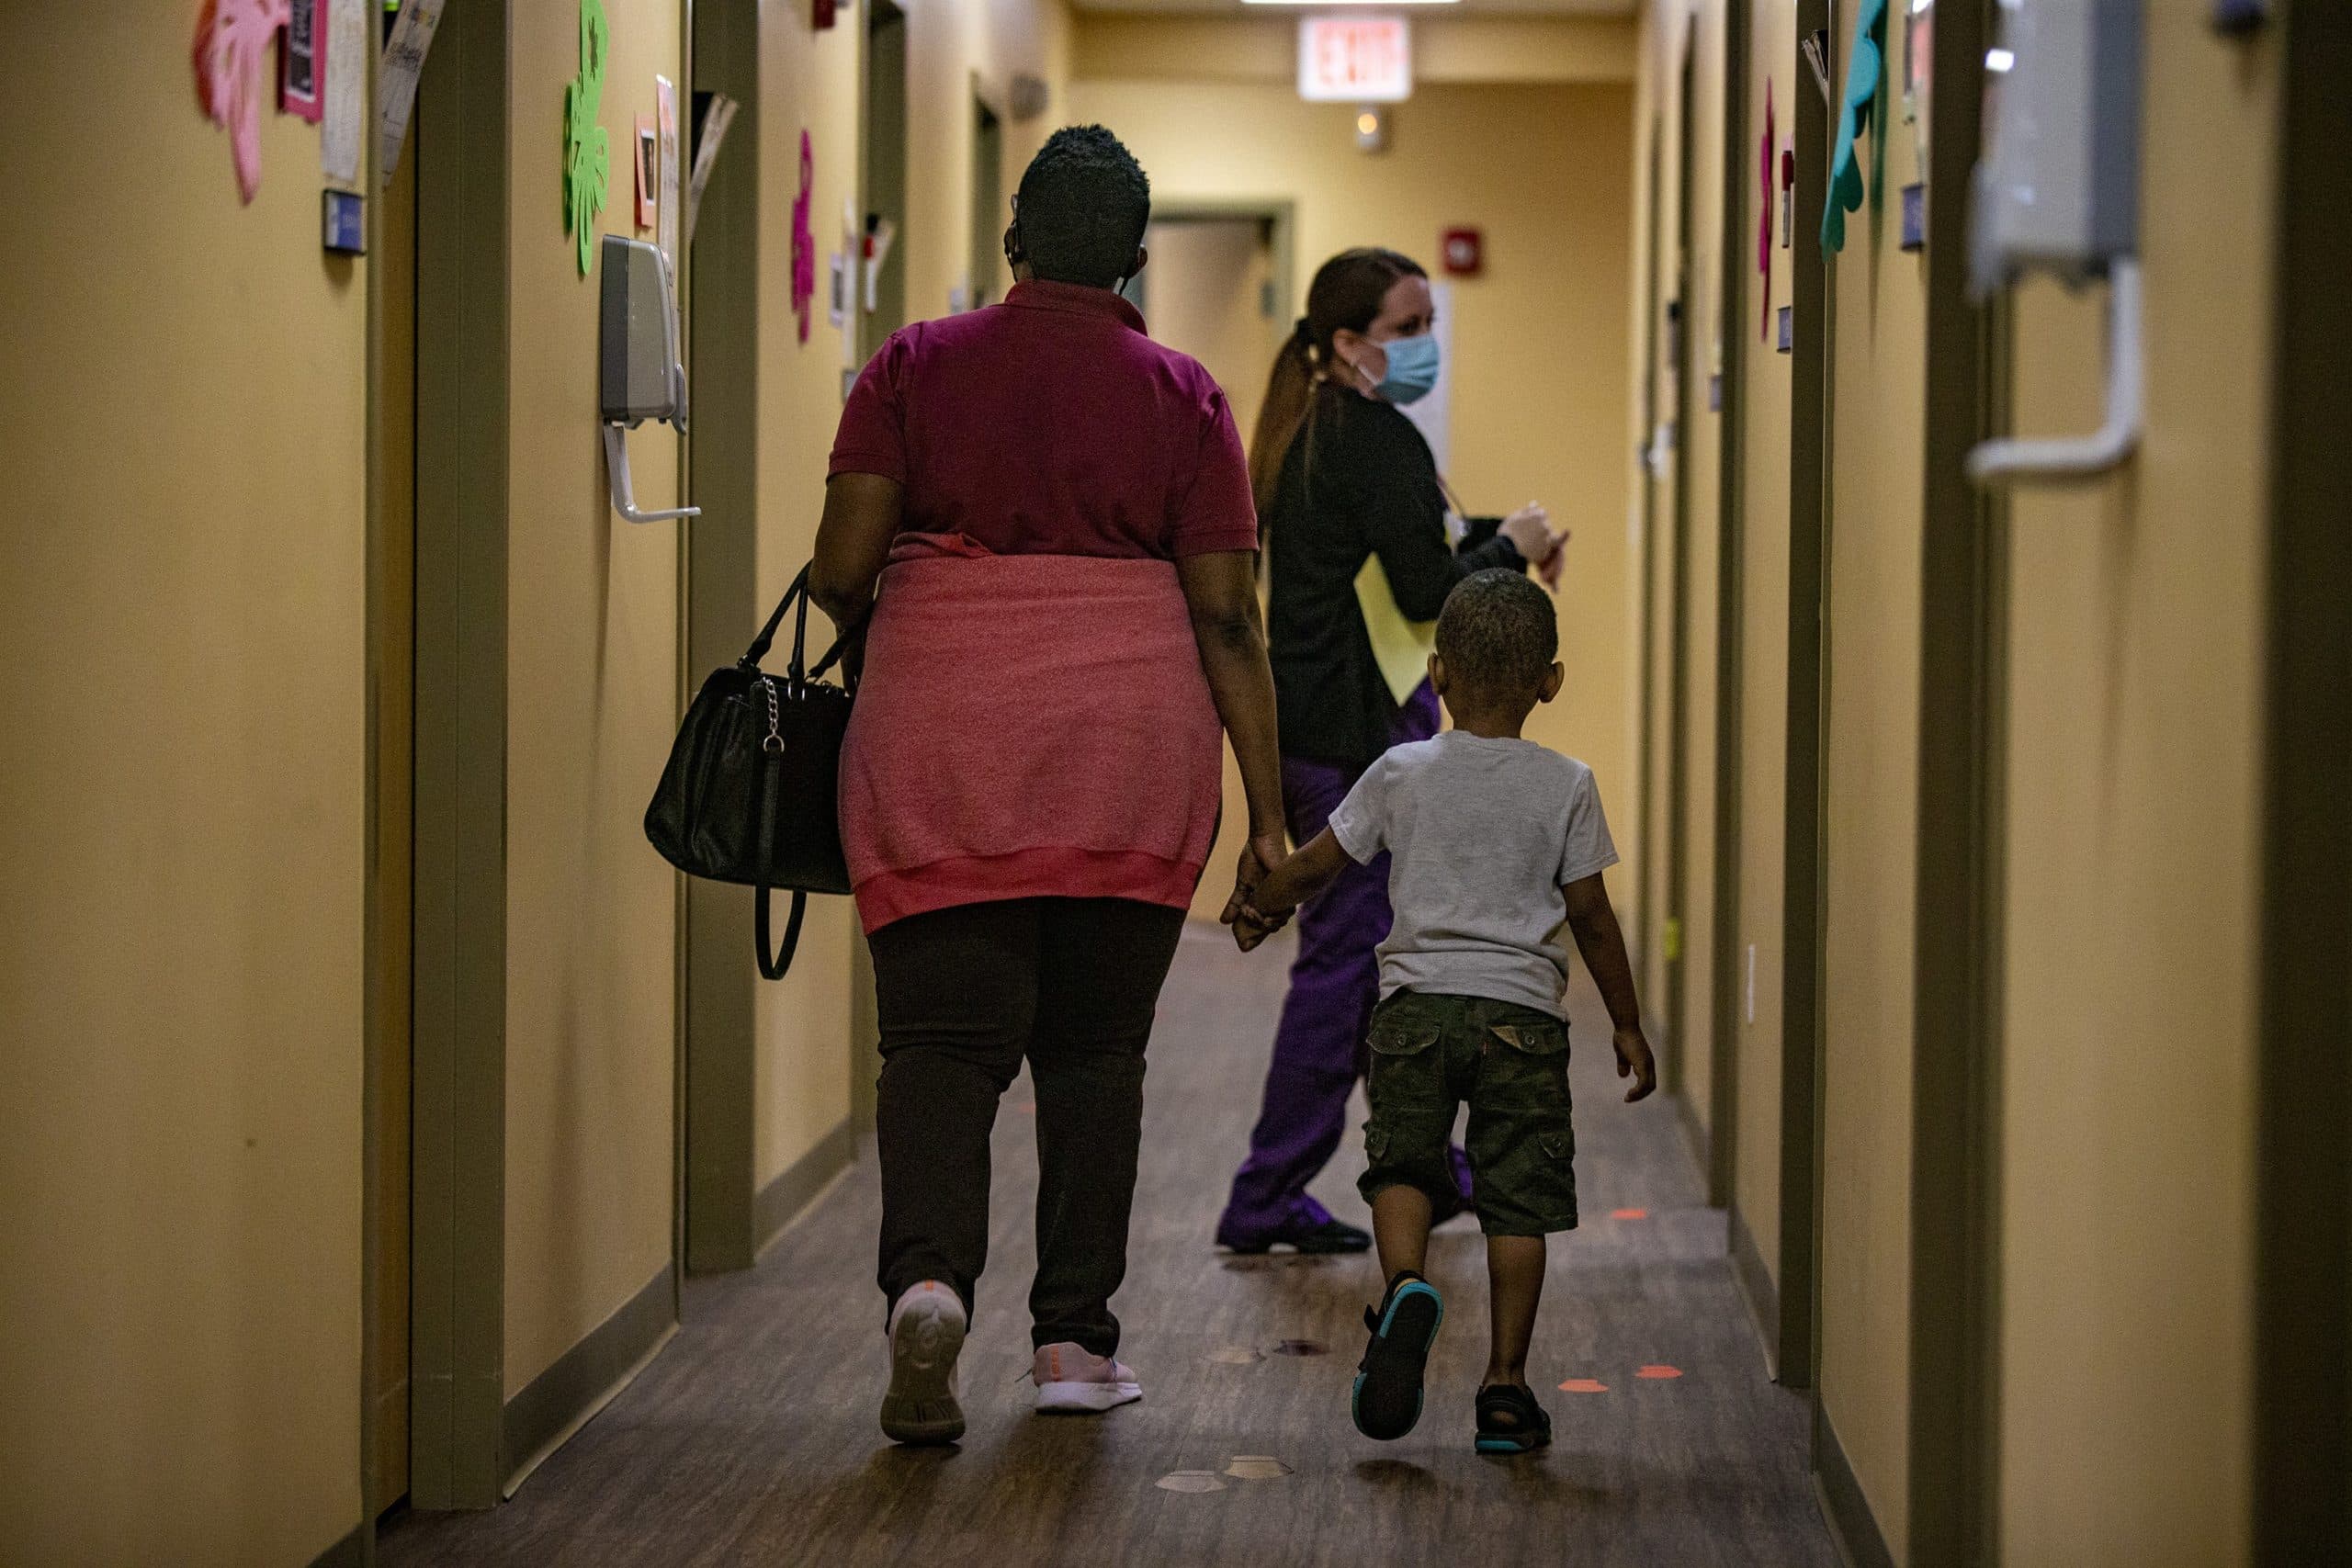 Medical assistant Keyla Santiago-Rivera leads a mother and child to an examination room at Brockton Neighborhood Health Center. (Jesse Costa/WBUR)